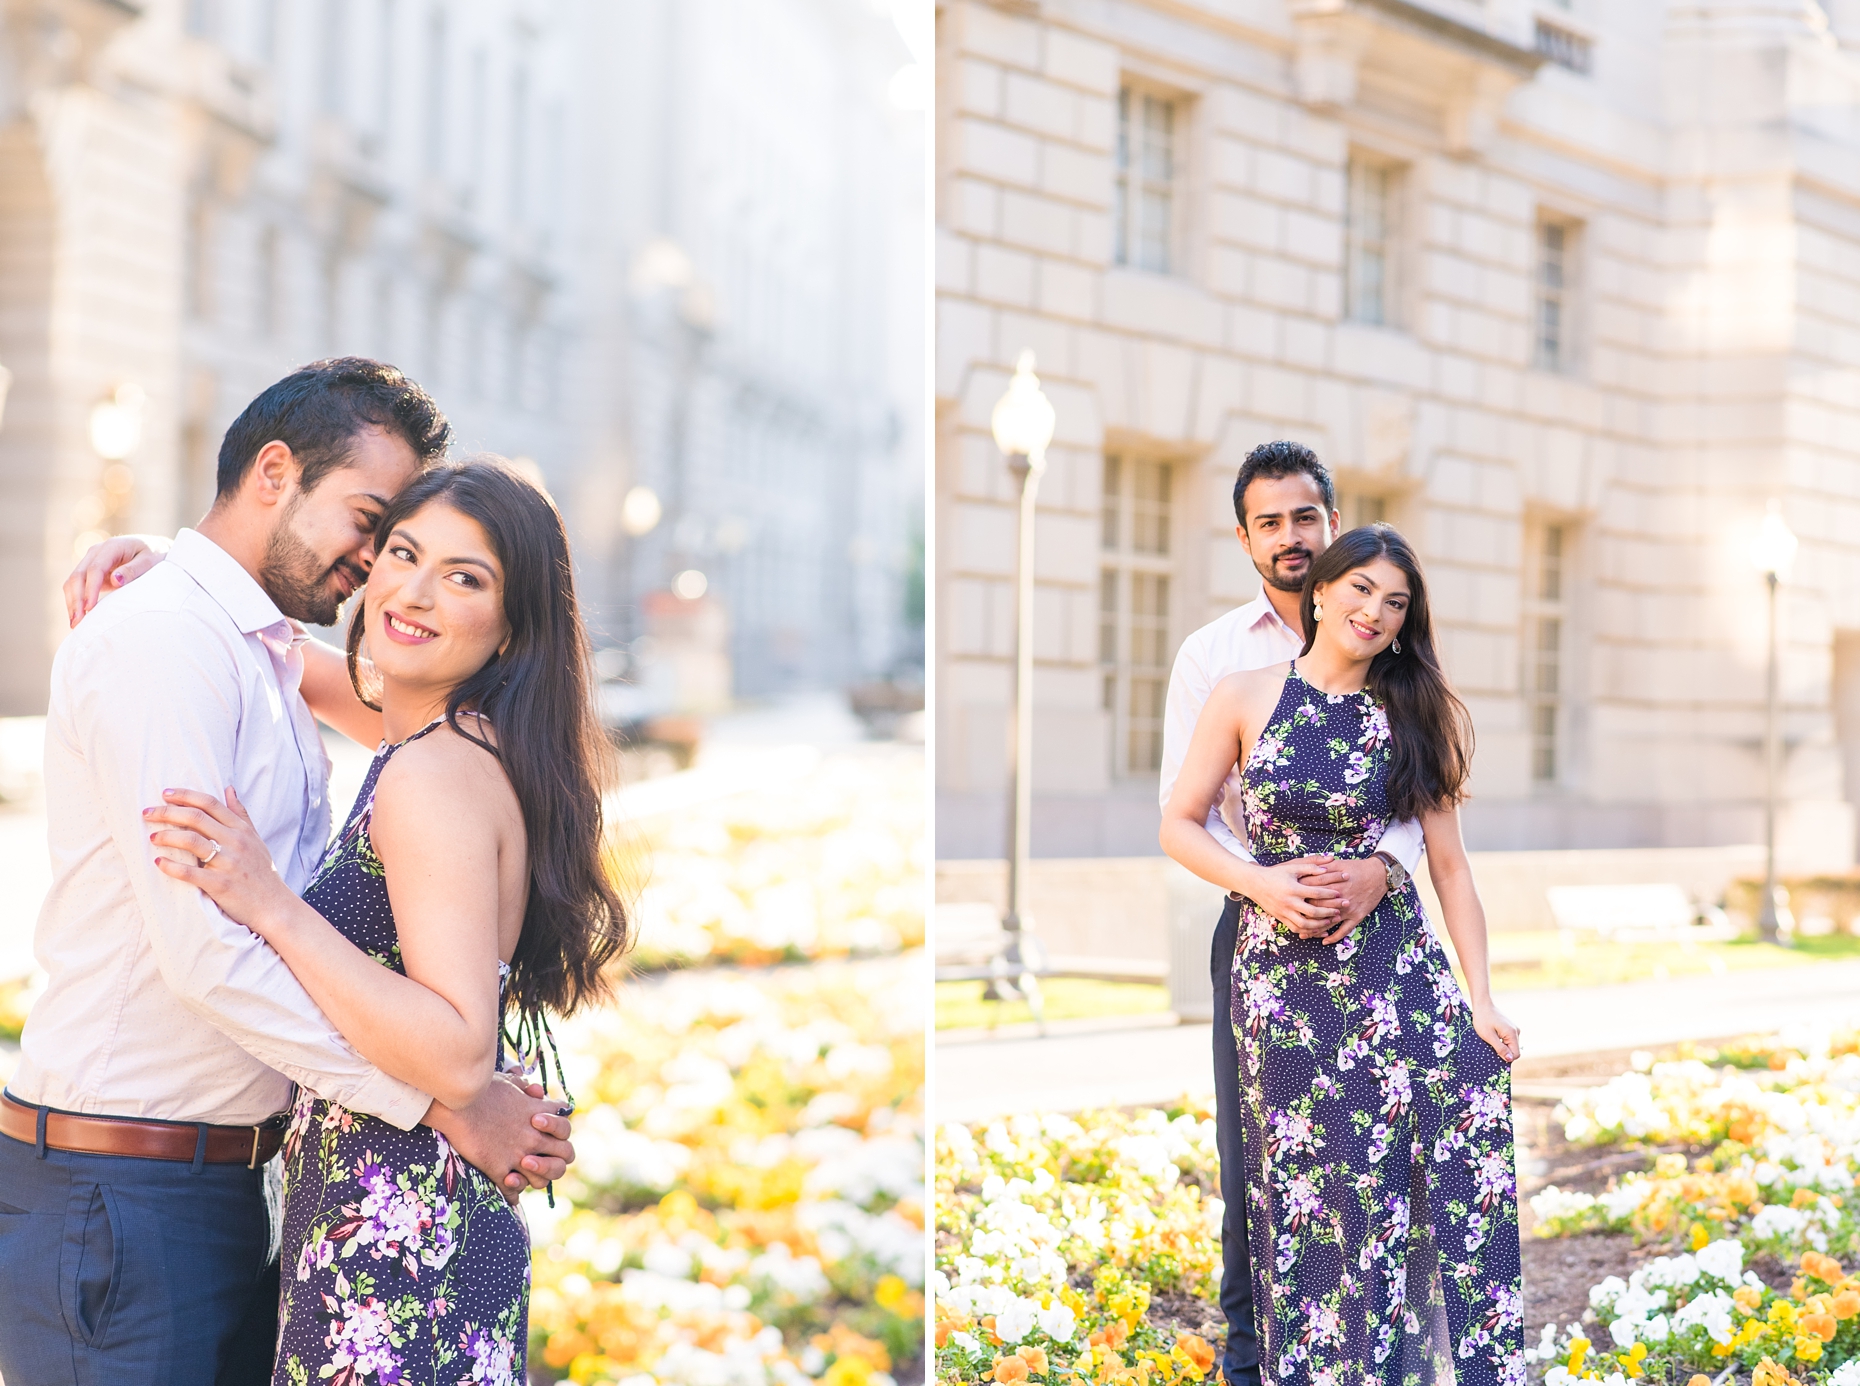 CapitolHillDCEngagementSessionPhotography-ManaliPhotography-010